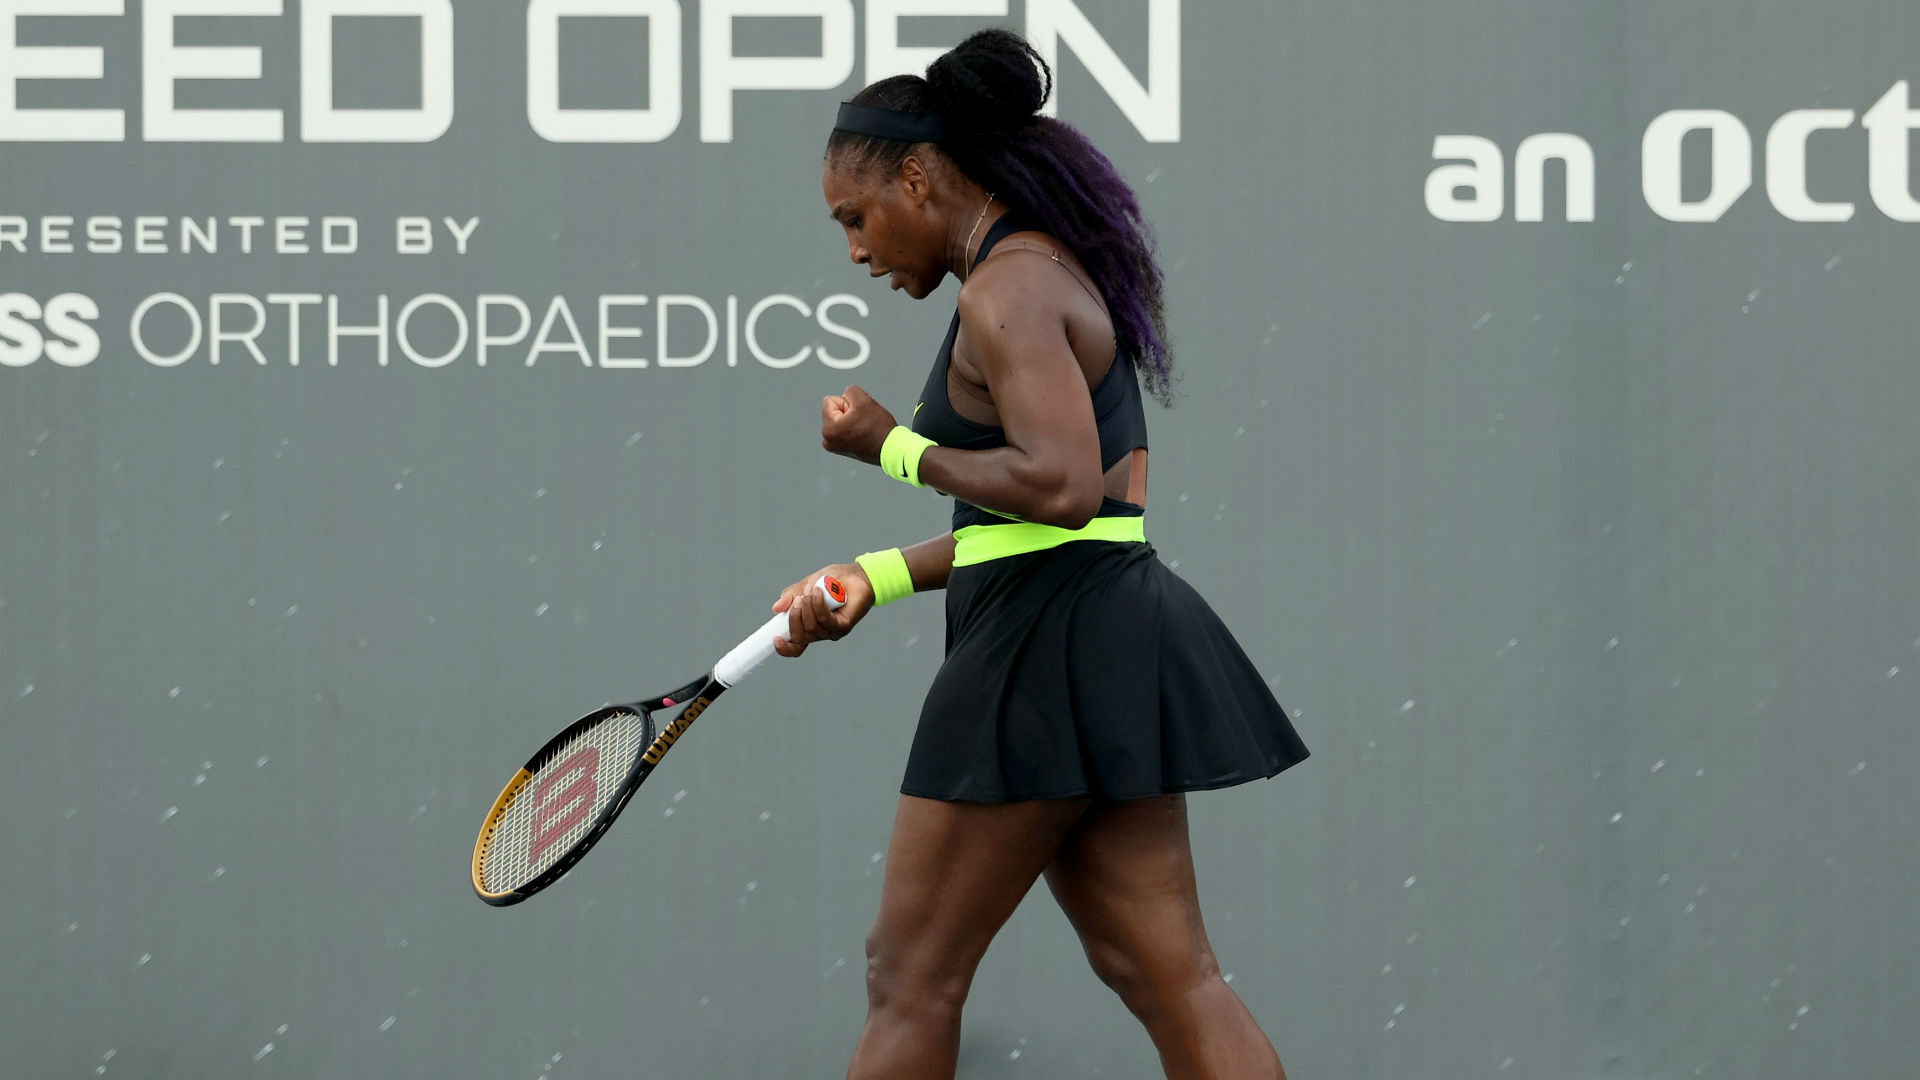 Serena Williams welcomed a tight battle against her sister Venus with the US Open fast approaching.